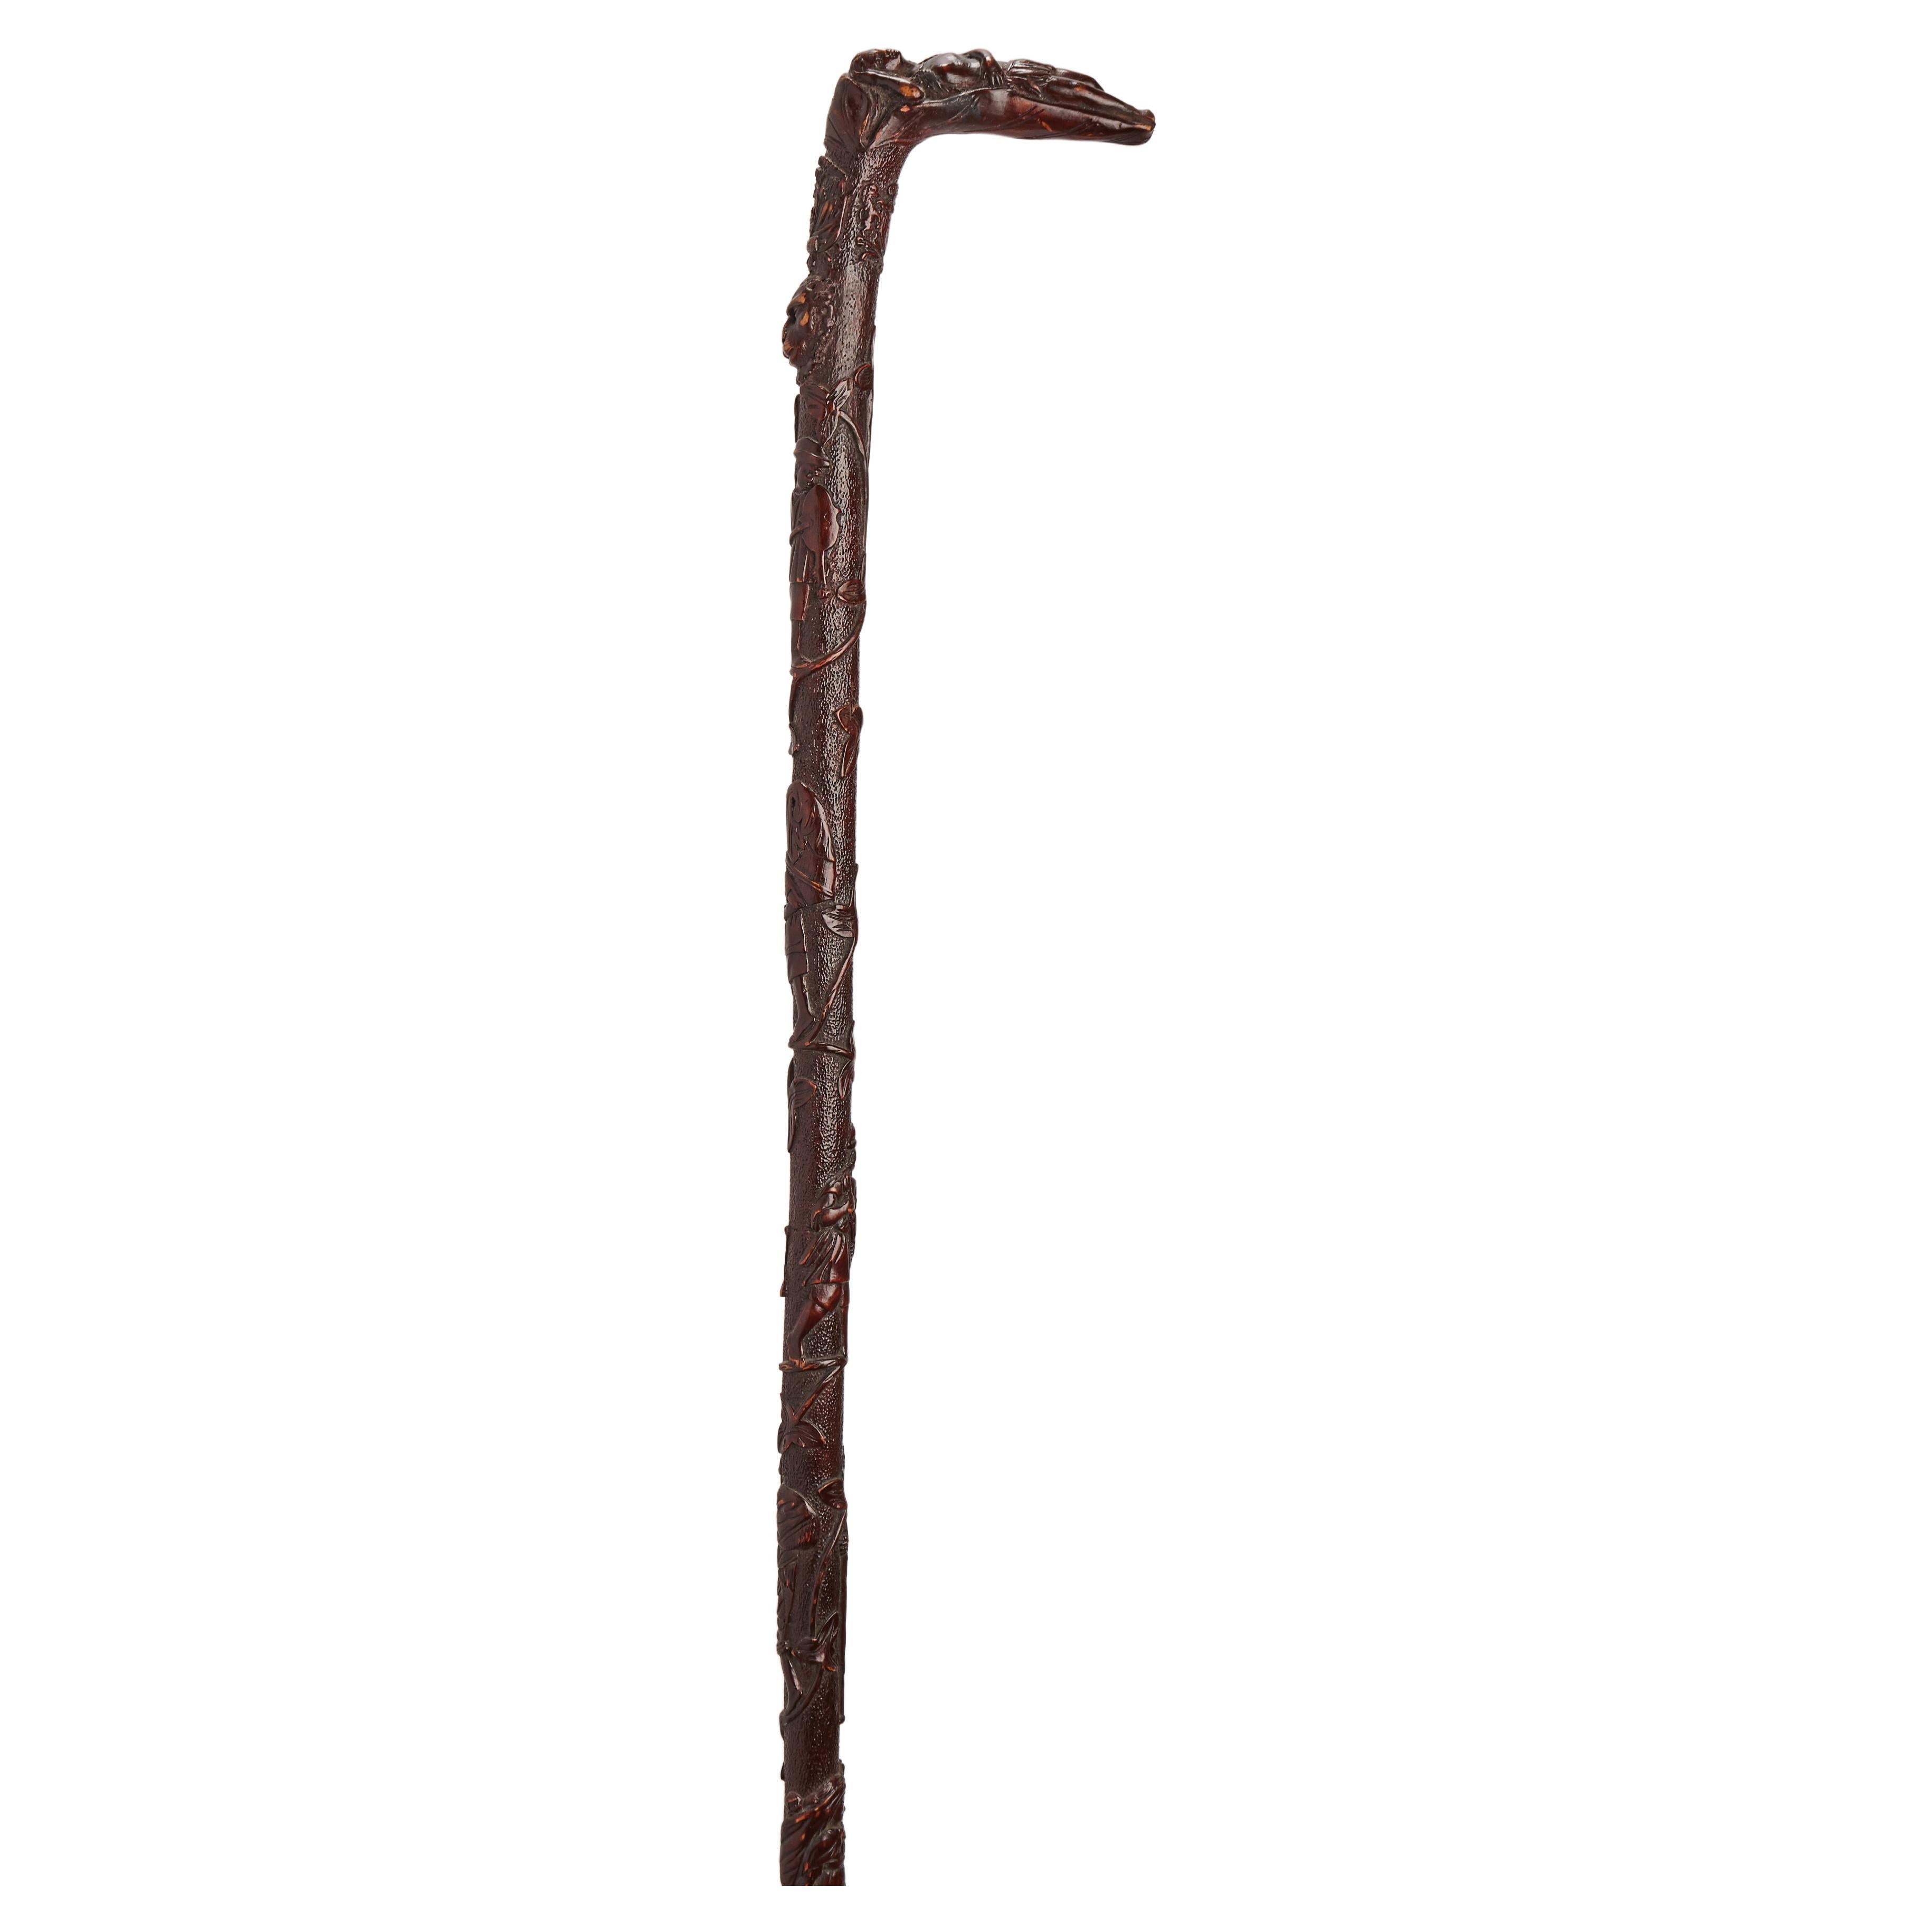 A refined Folk art walking stick with arts and crafts, Center America 1860.